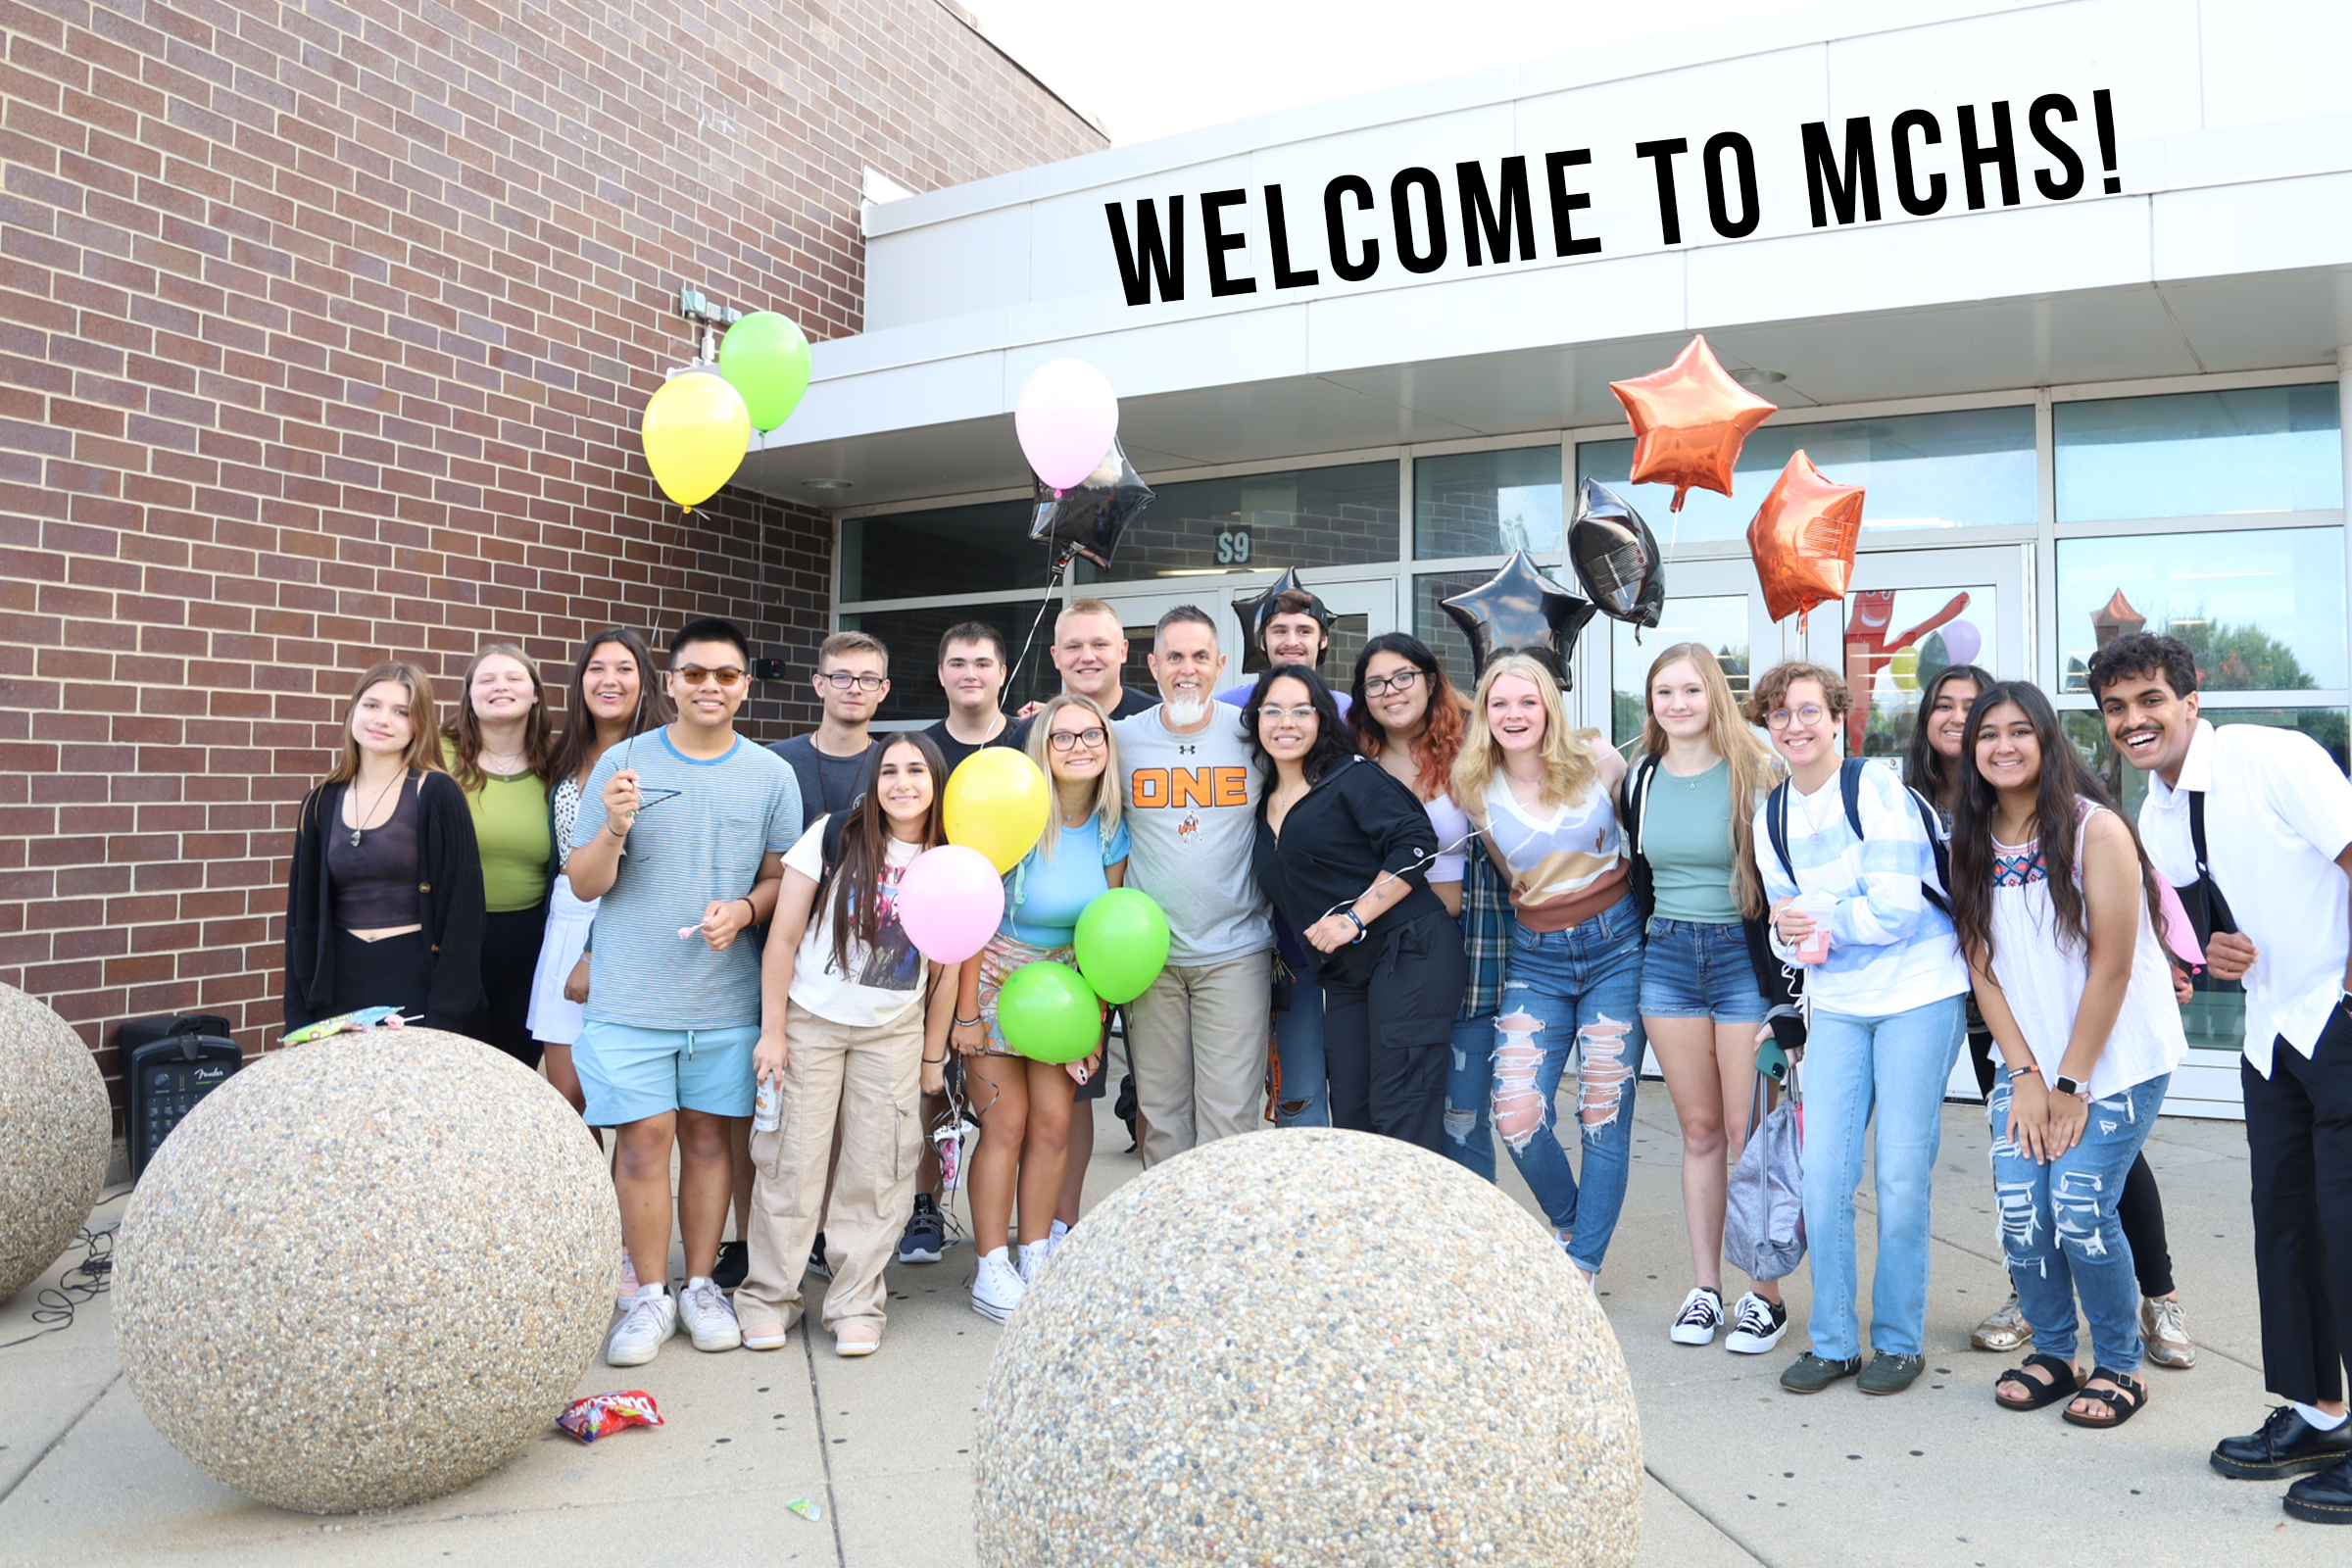 Welcome to MCHS!